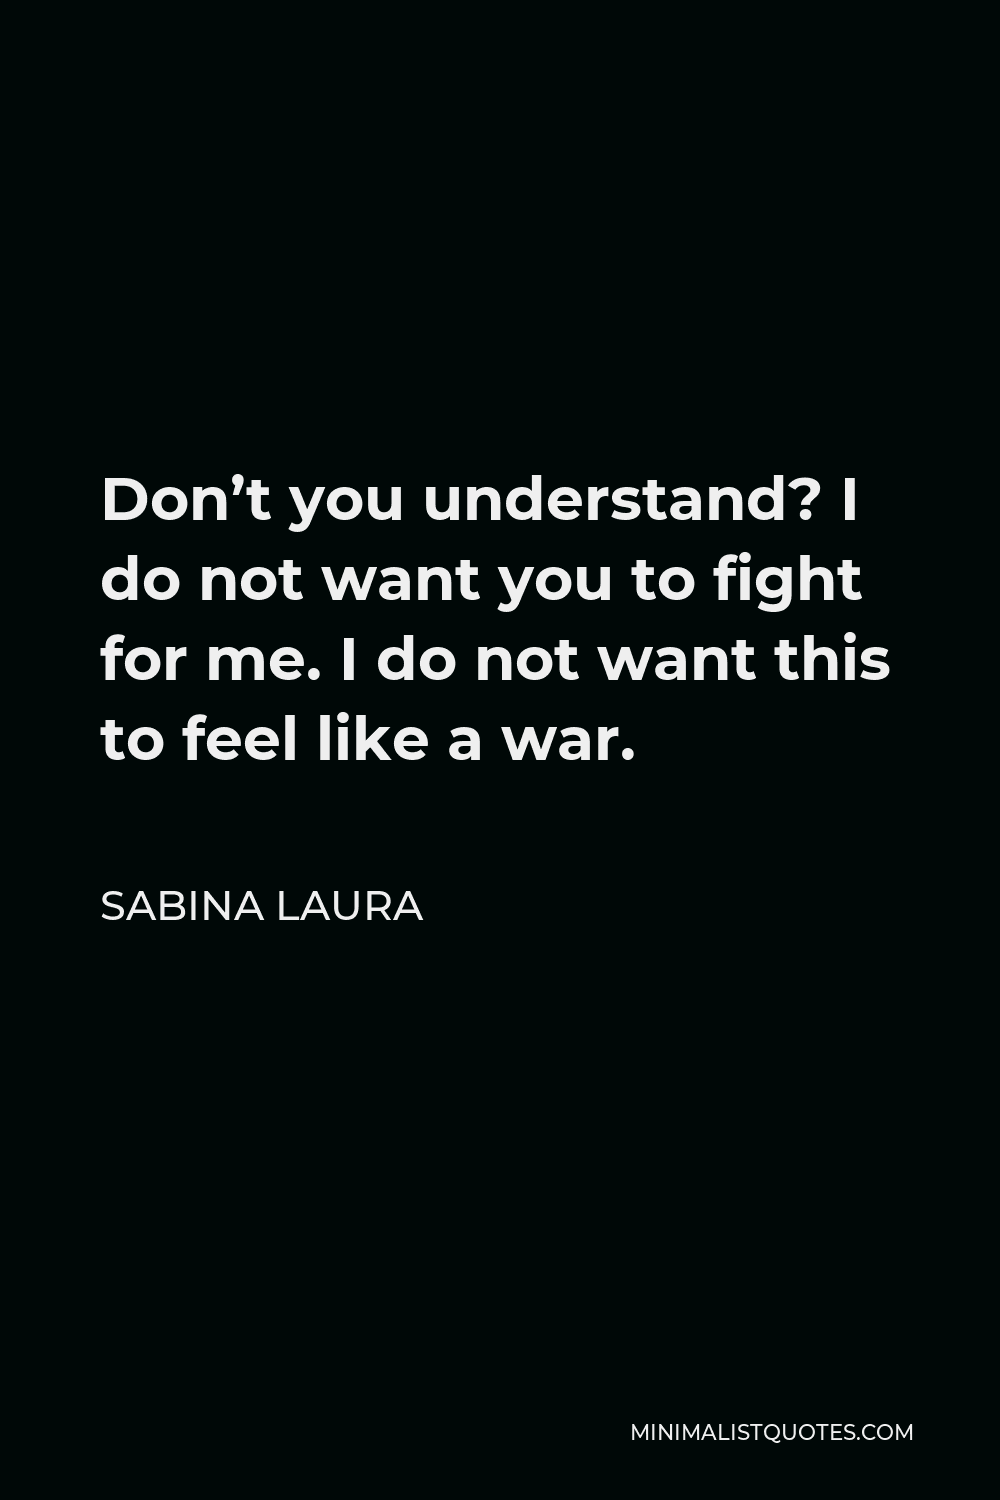 Sabina Laura Quote - Don’t you understand? I do not want you to fight for me. I do not want this to feel like a war.